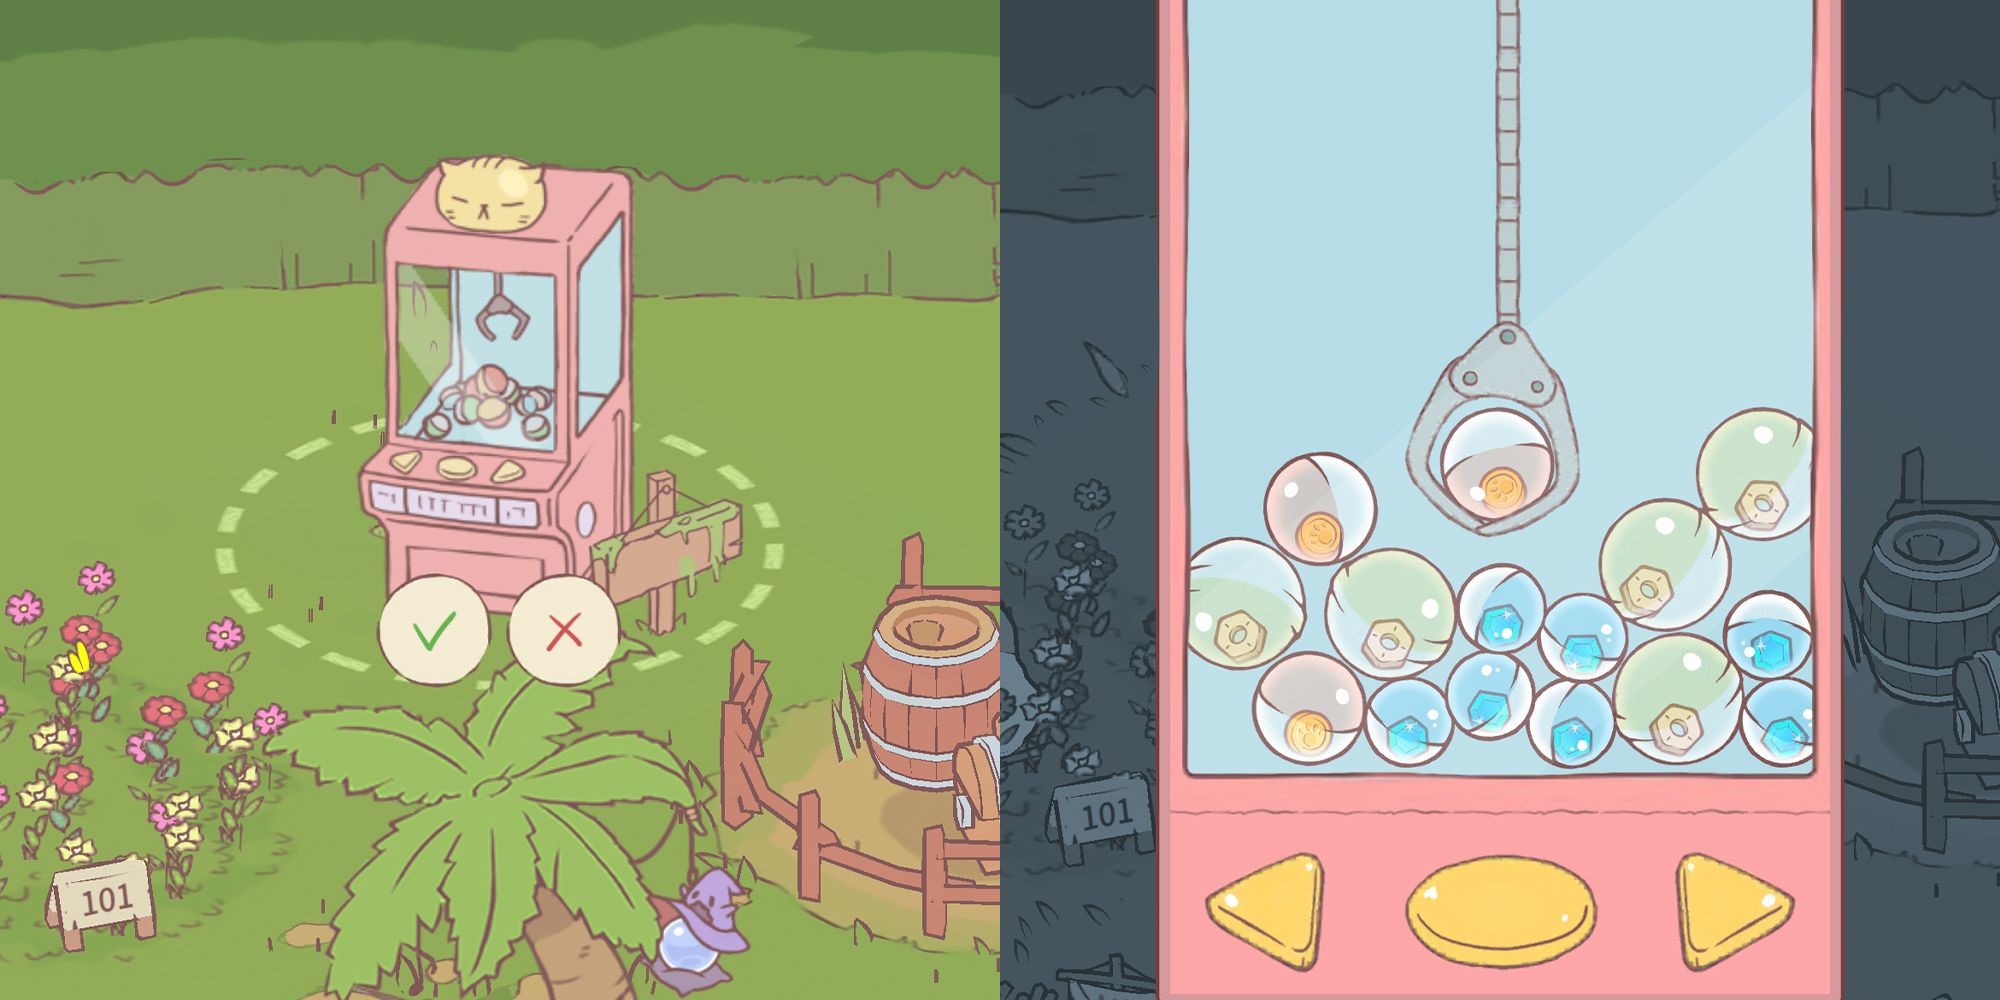 Left Panel: A pink claw machine with a cat face on it. Right Panel: A claw machine picks up a capsule with coins in it. Images from Cats And Soup.